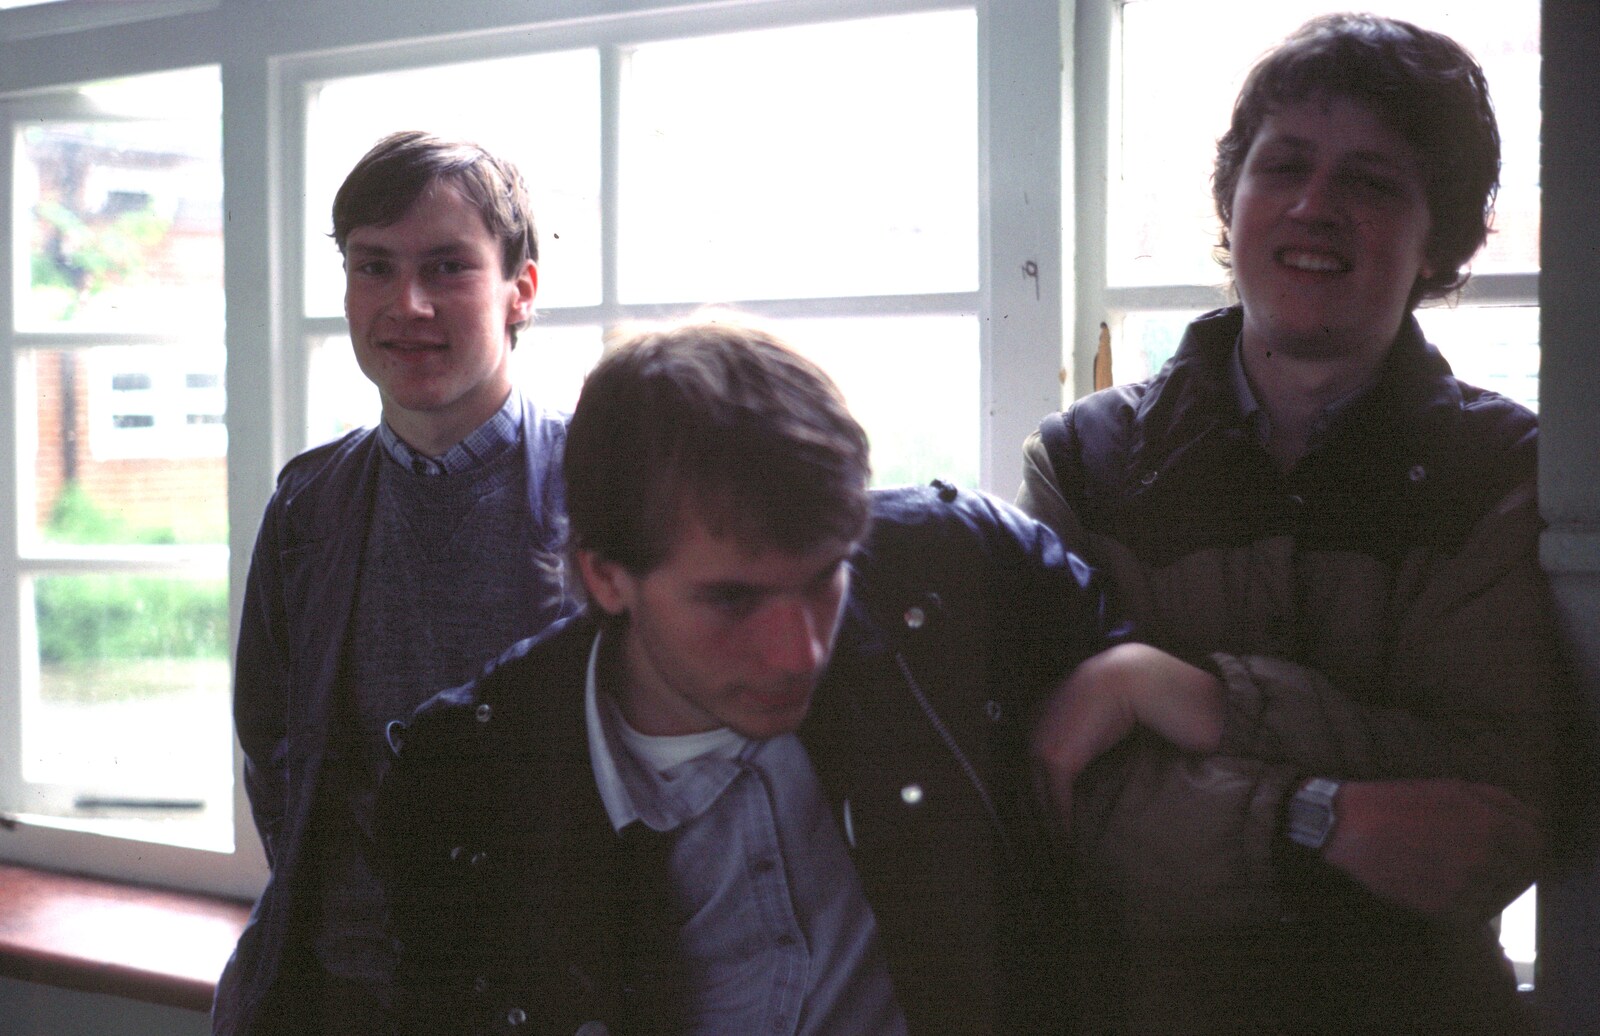 Andy Poppit on the windowsill at Brockenhurst College from Nosher's 18th pre-Birthday and College Miscellany, Sway and Brockenhurst - 22nd May 1985